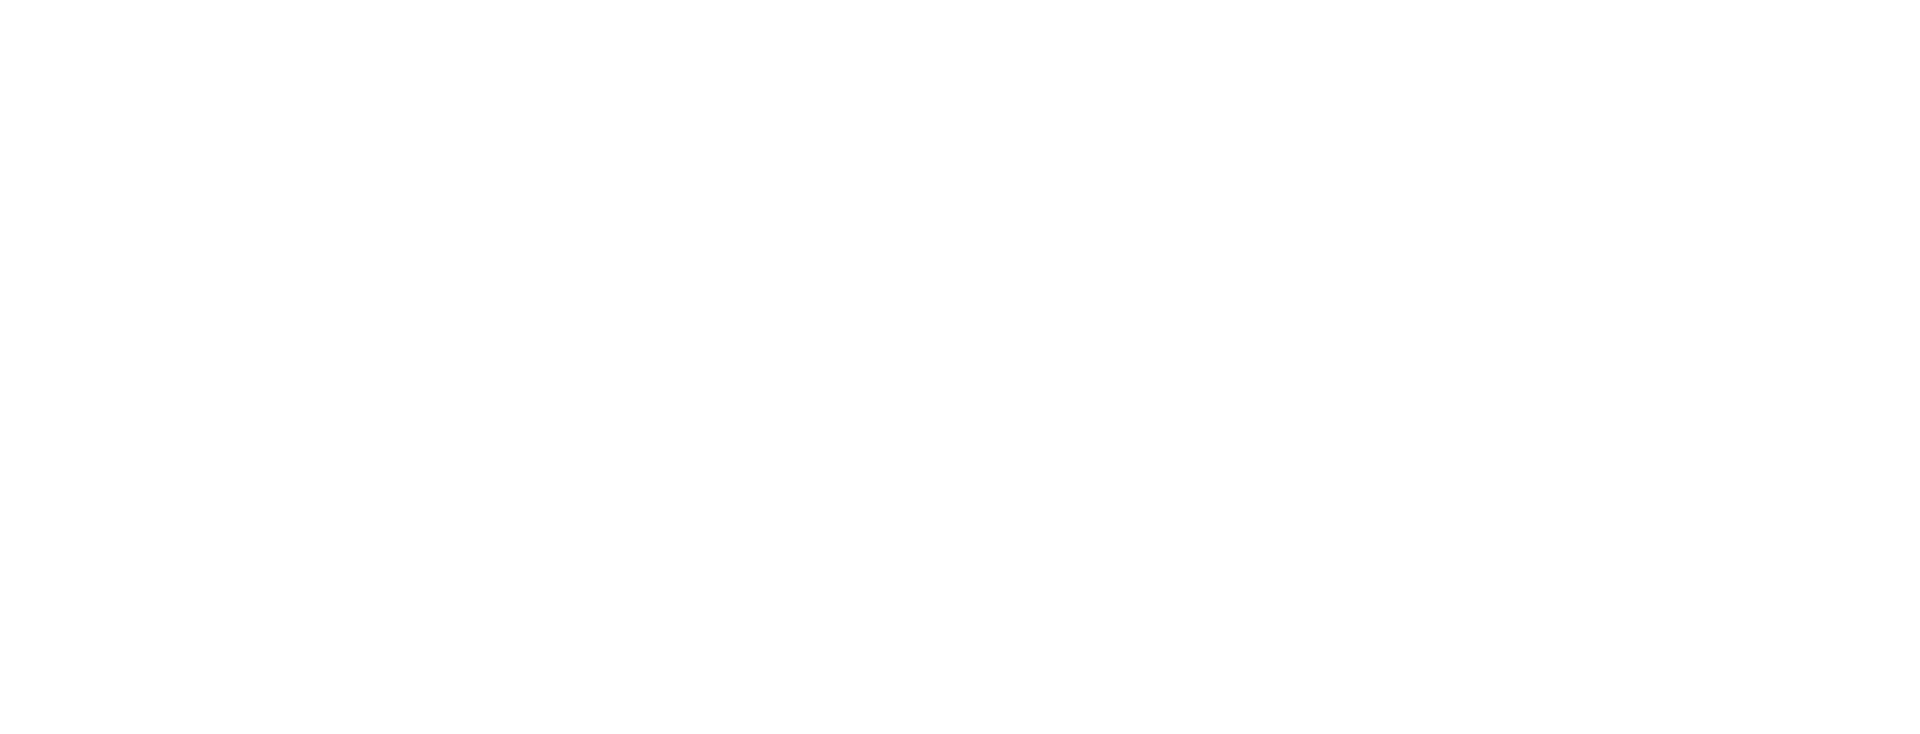 Give your Patients The Full Ray-Ban Experience